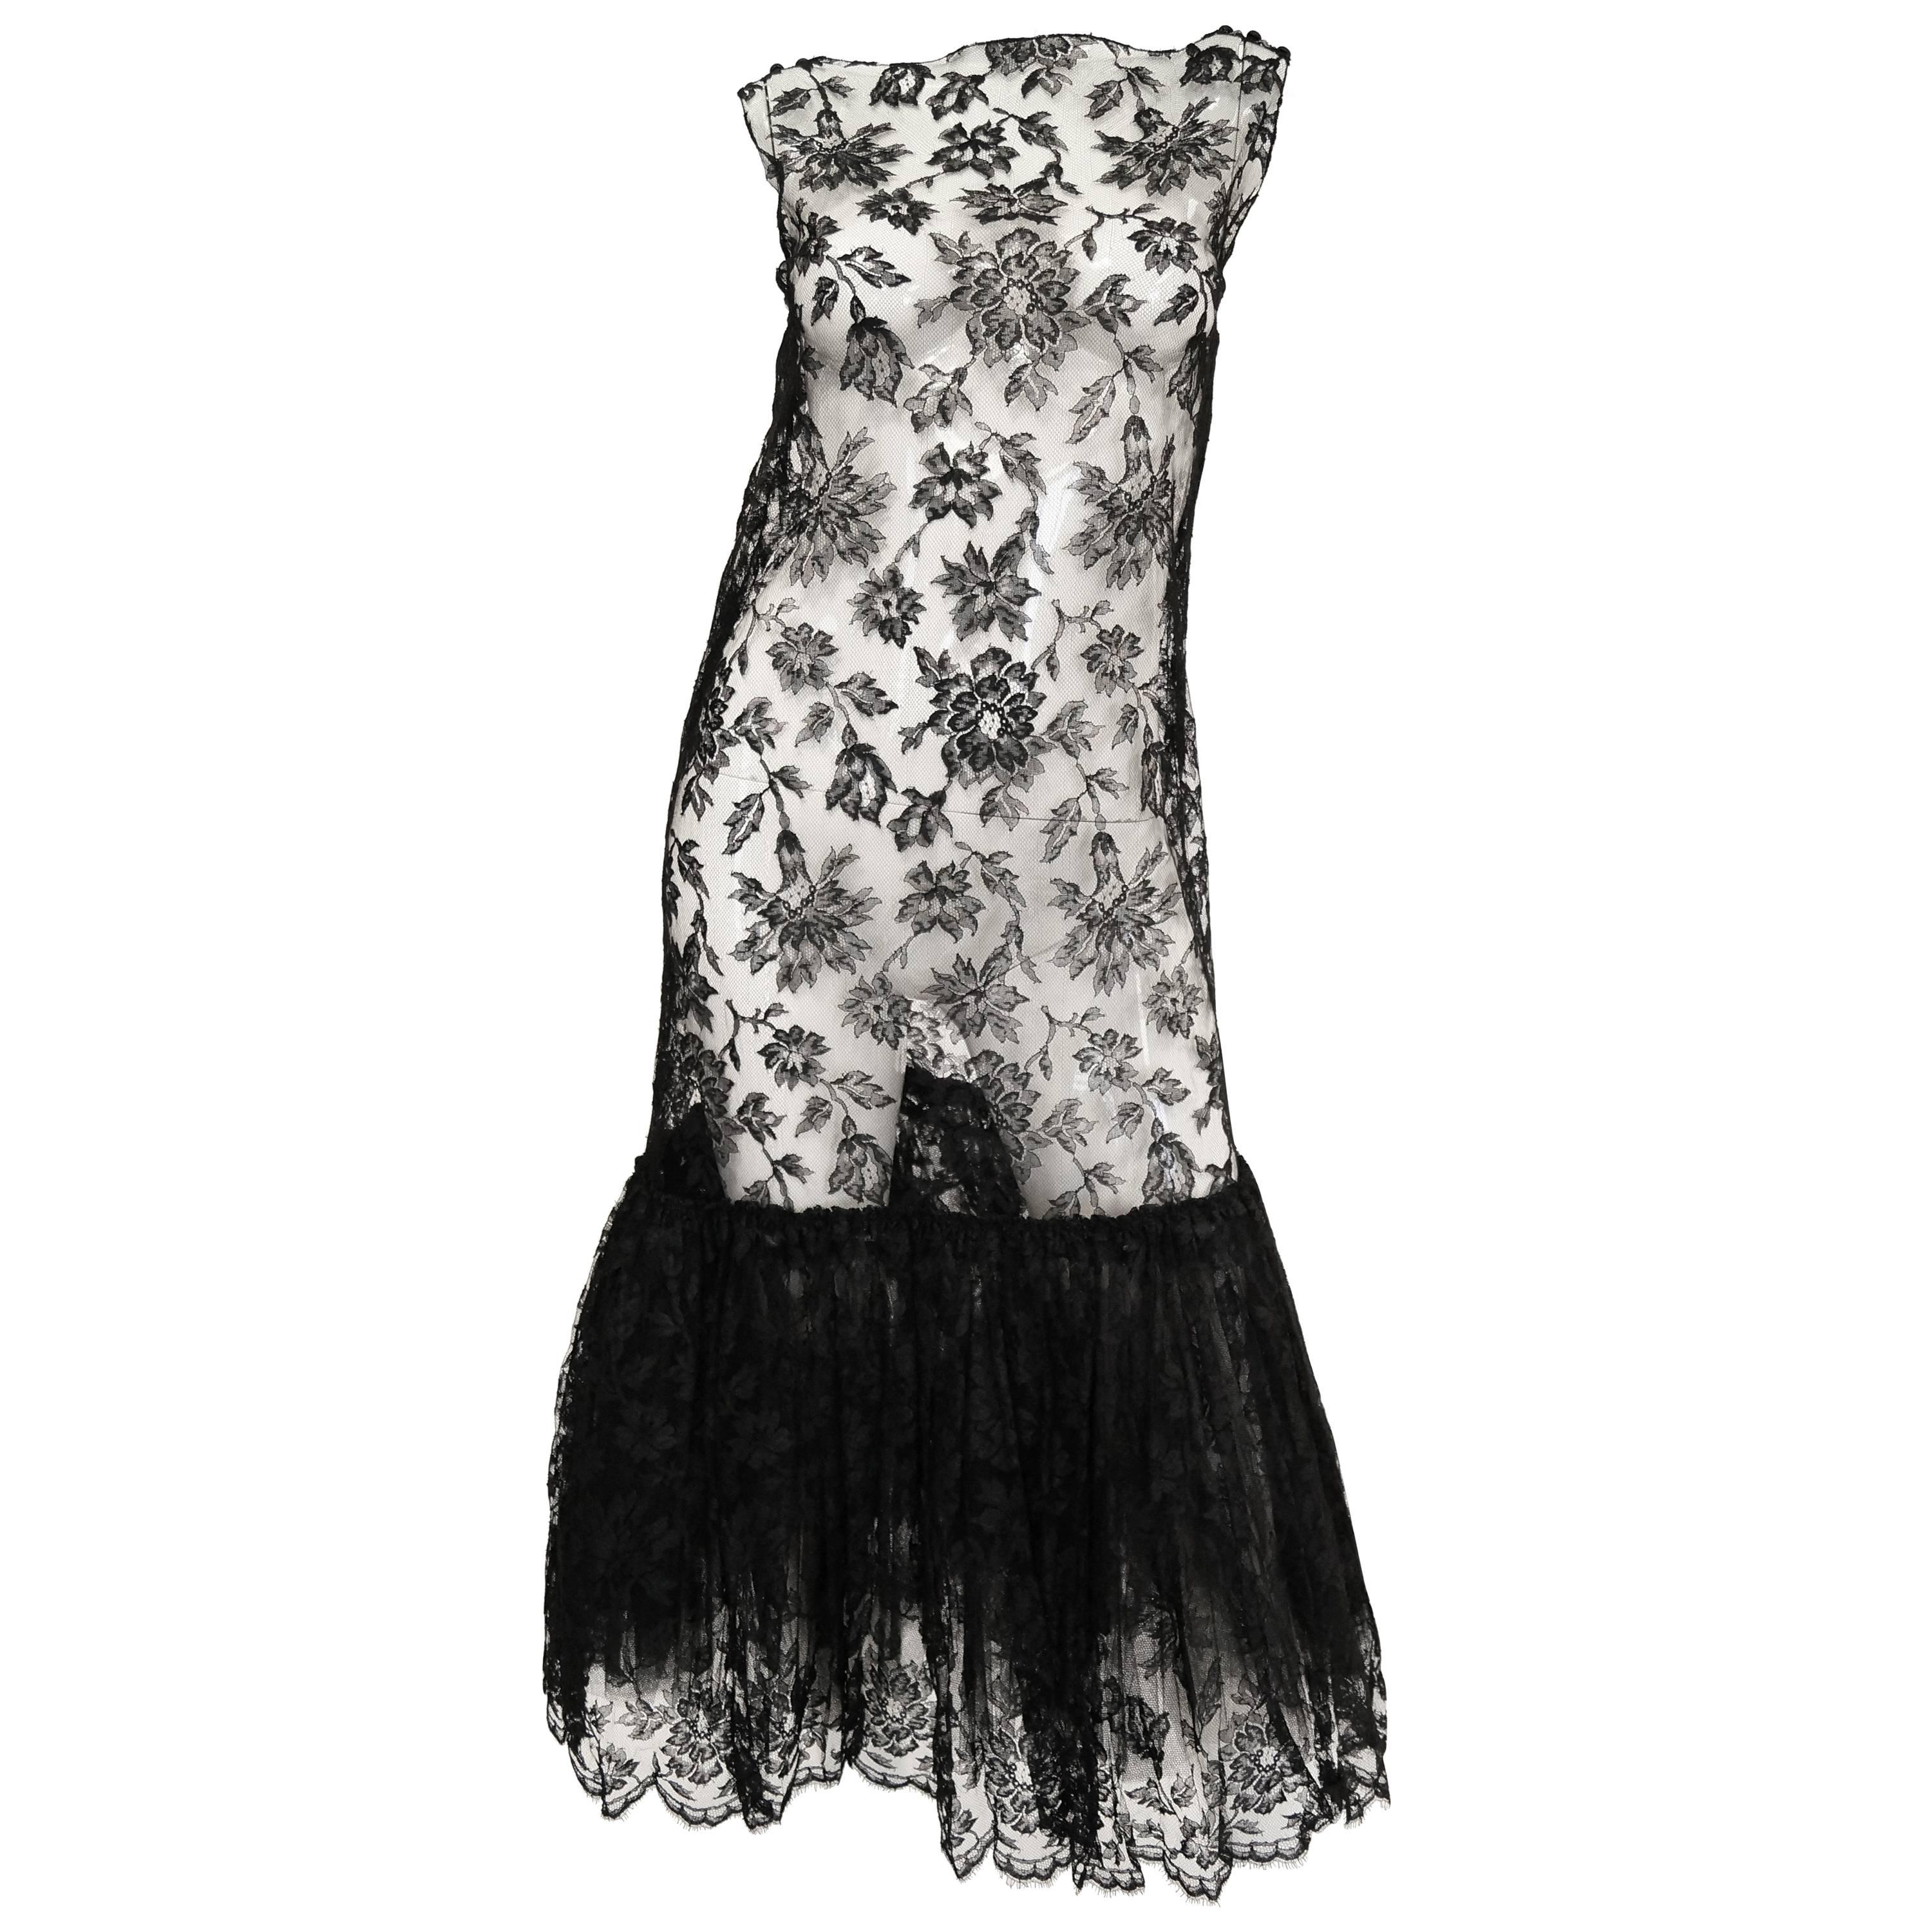 Sheer Black Lace Fluted Ruffle Dress, 1920s 